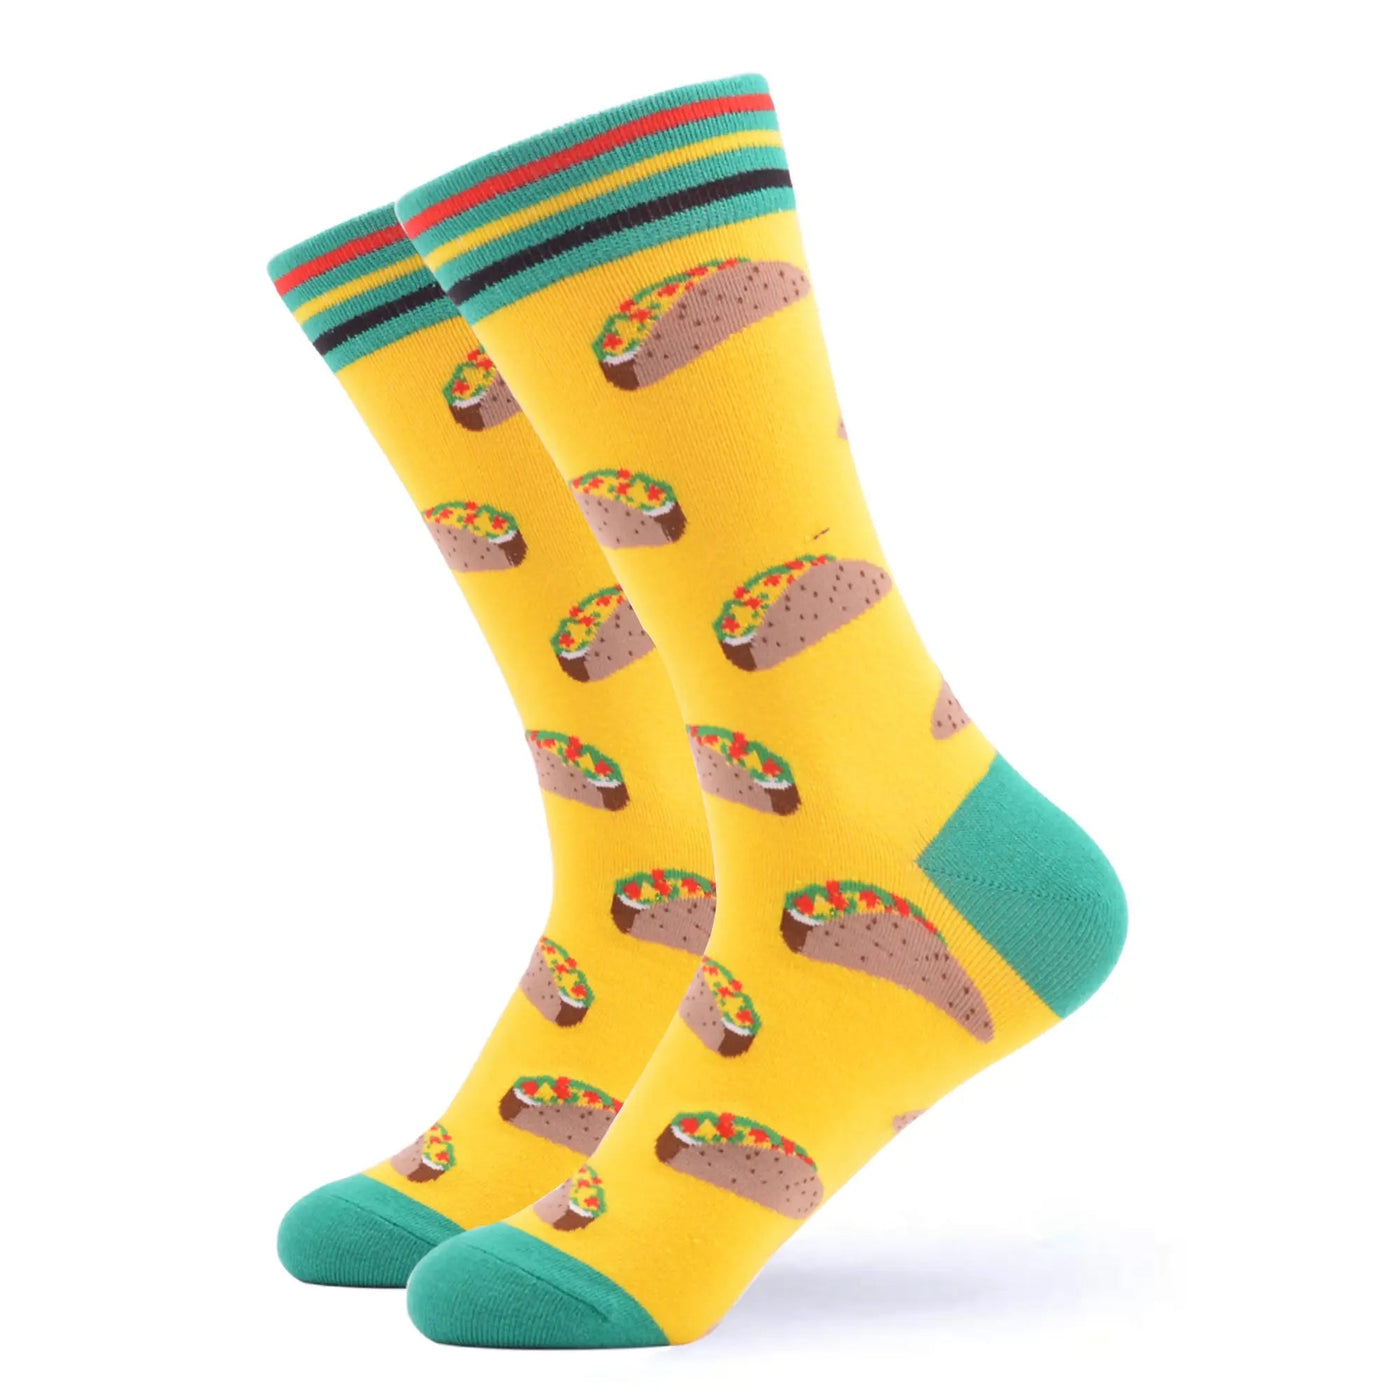 Women's mid calf taco socks with yellow and turquoise accent colors. 